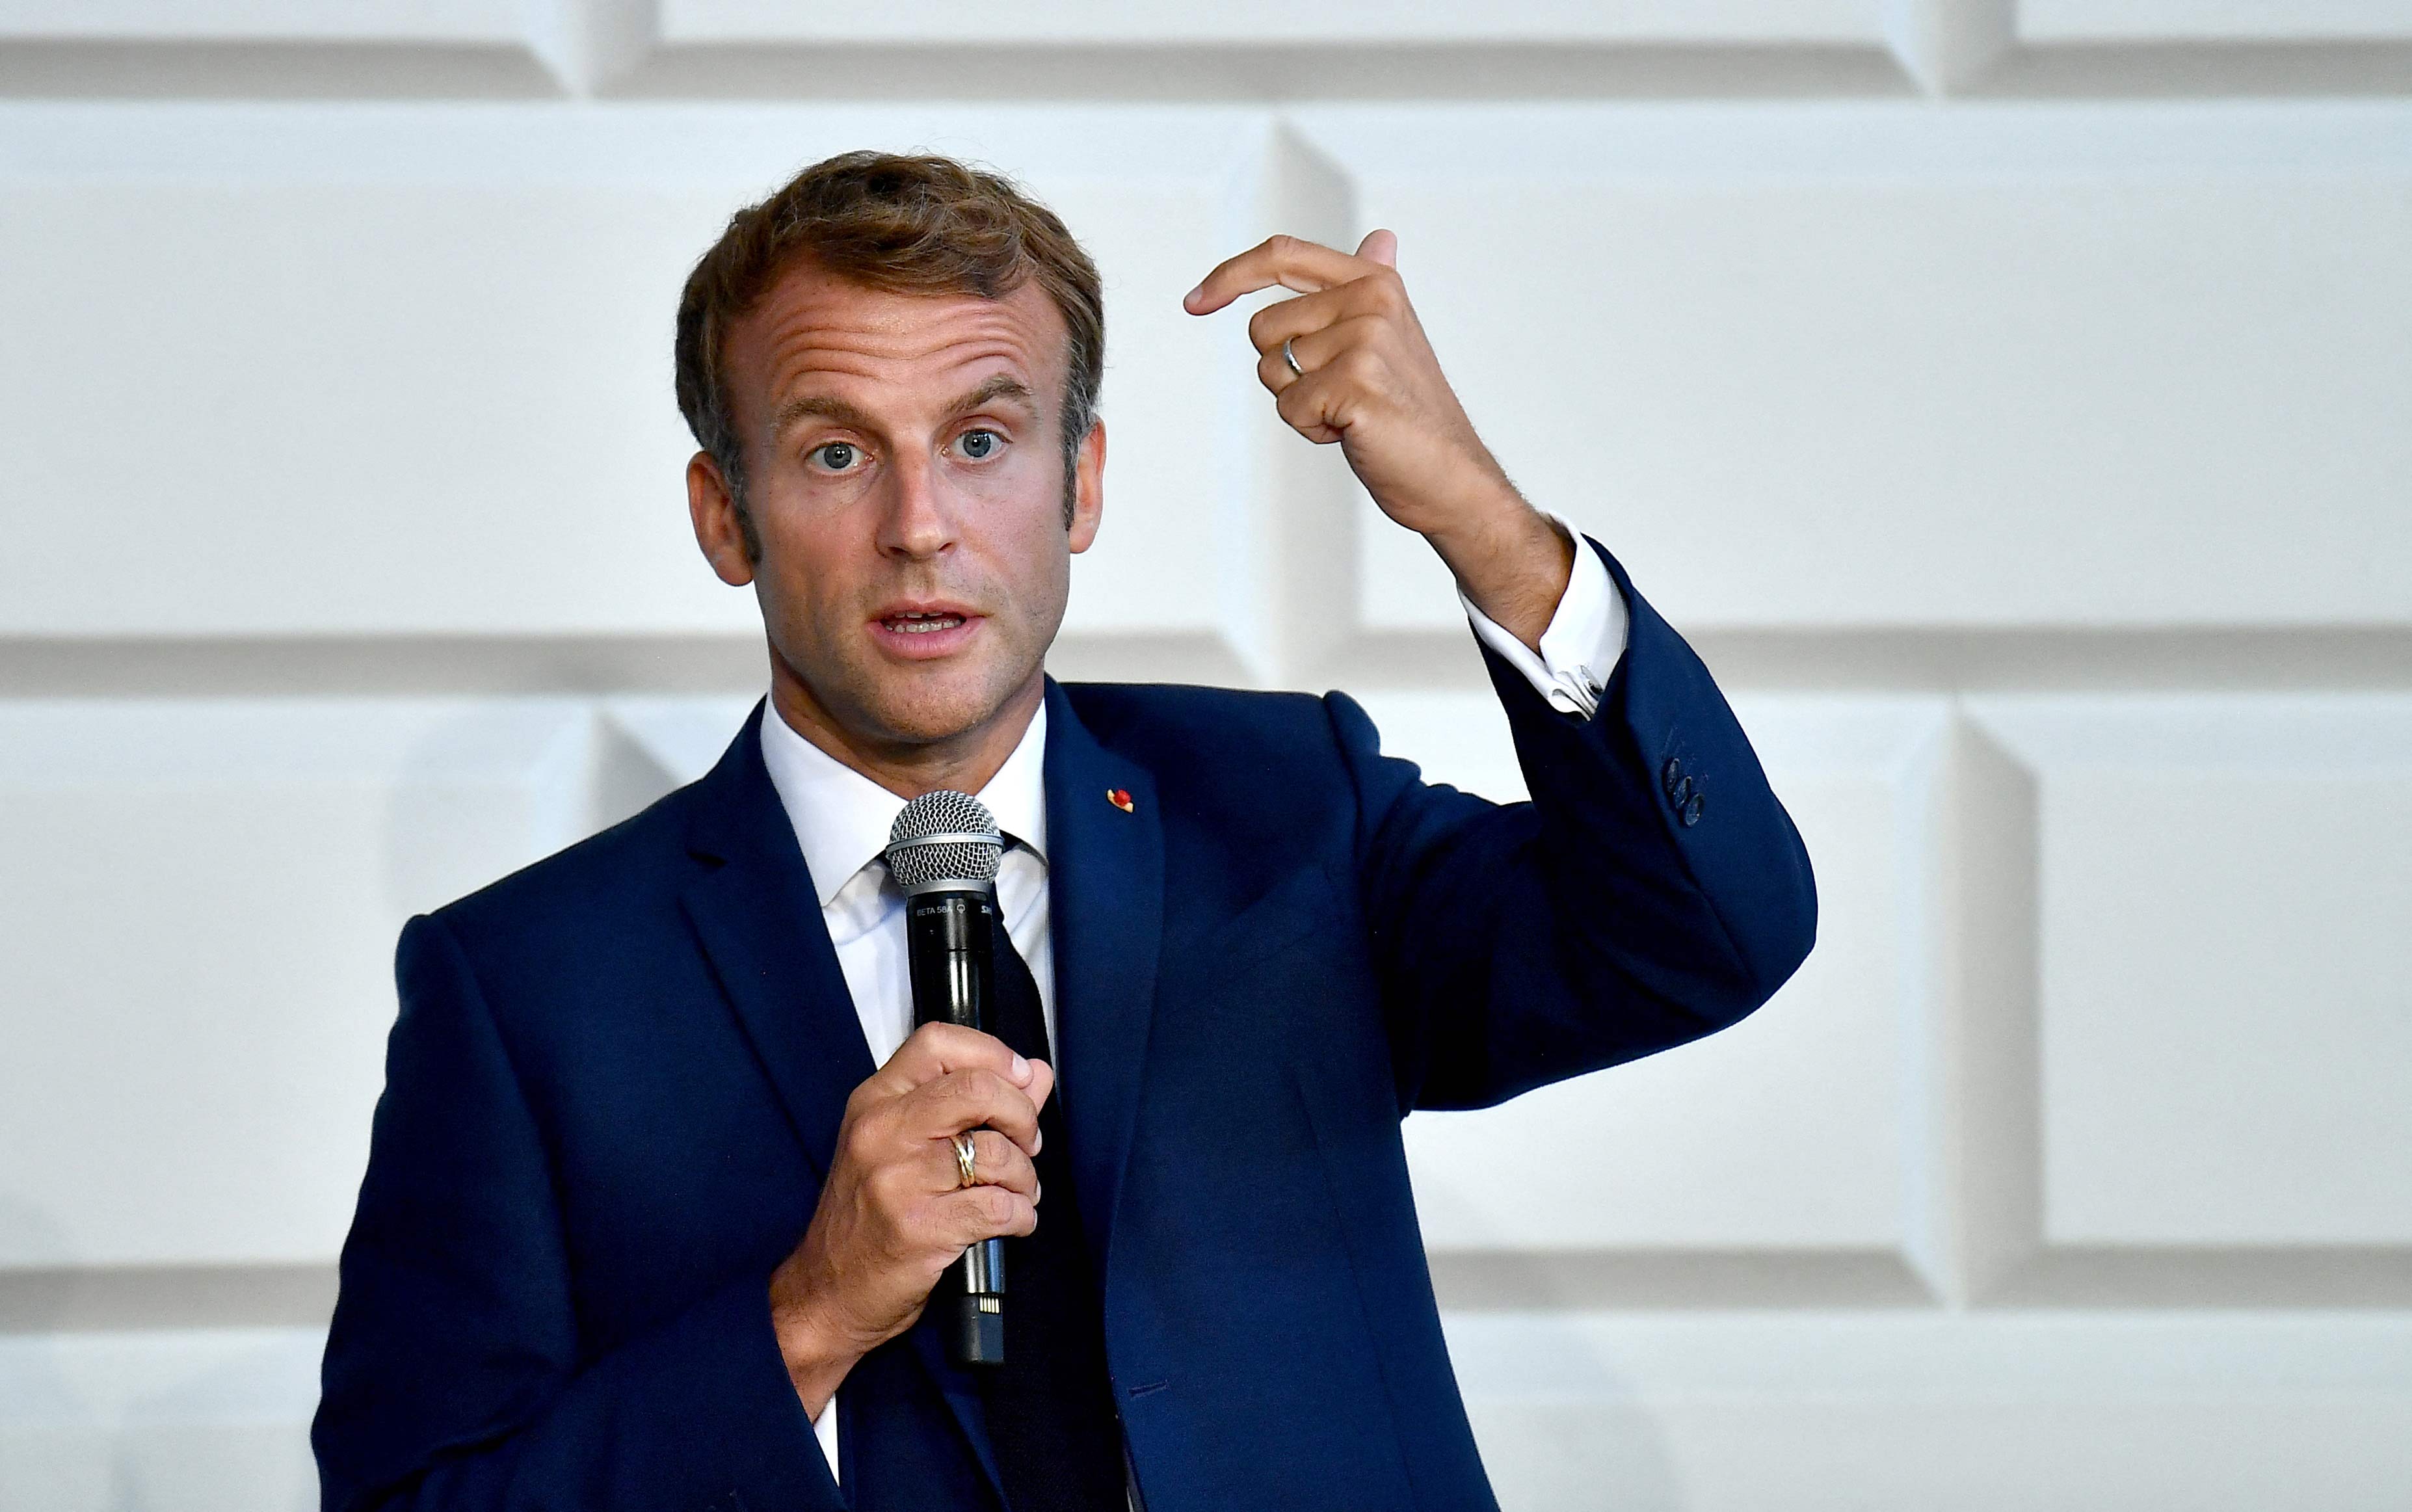 French President Emmanuel Macron speaks at Trinity College in Dublin on August 26.